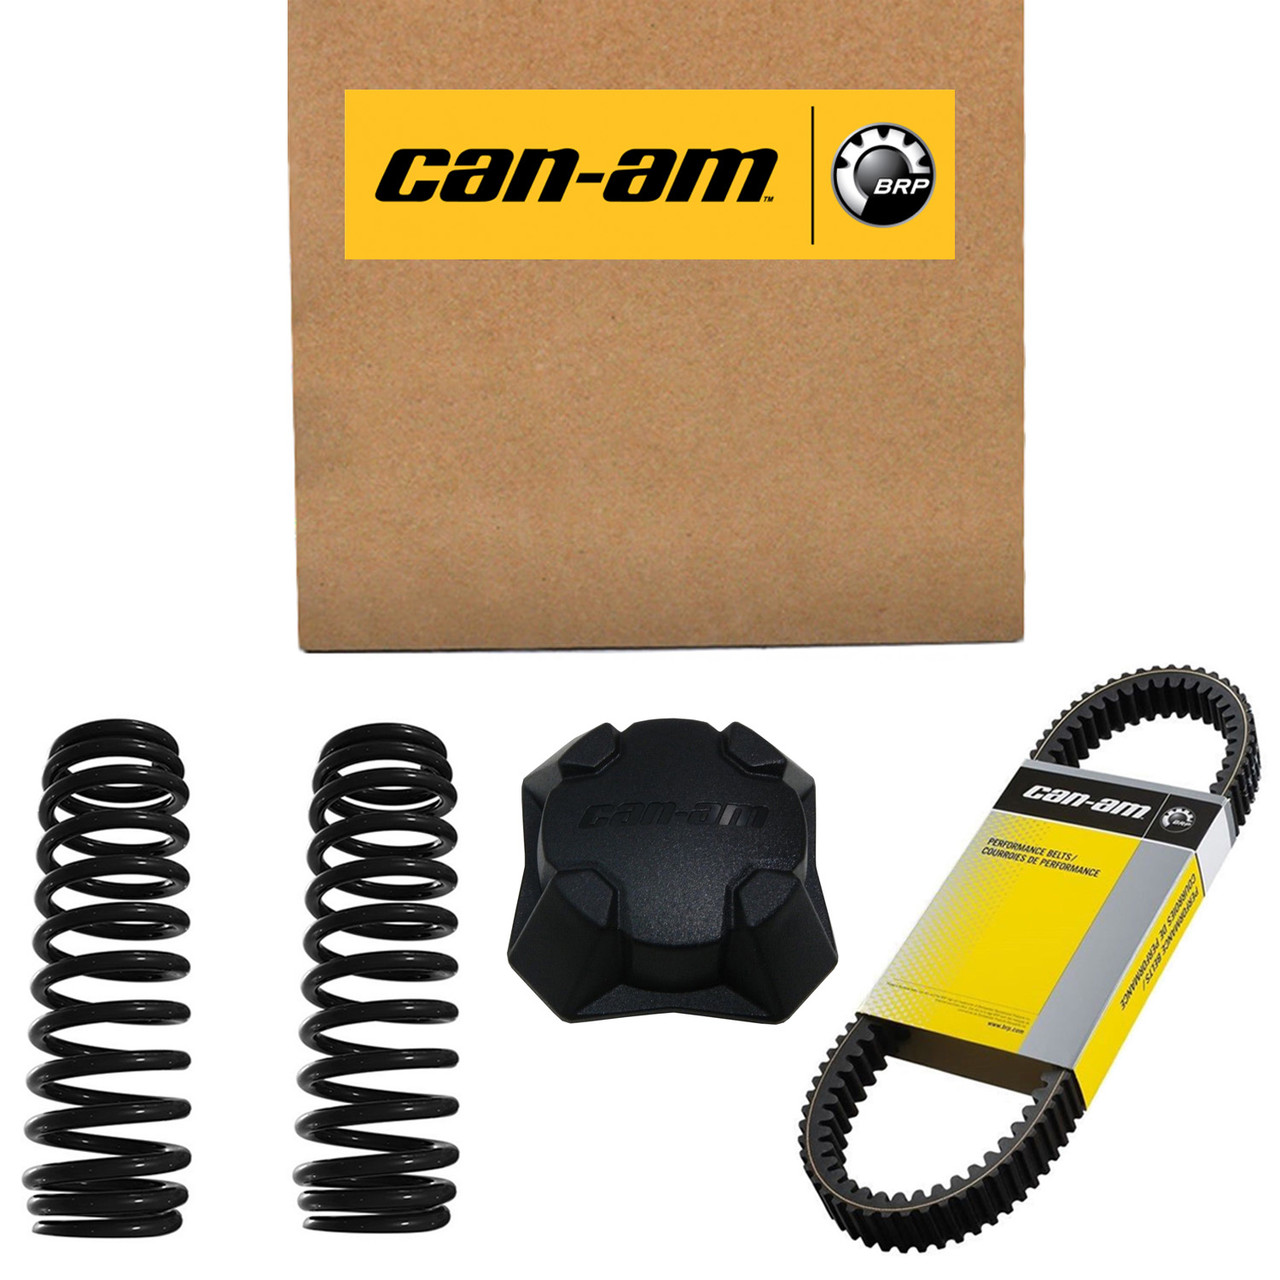 Can-Am New OEM Relay Ass Y, S3850AM8Q000